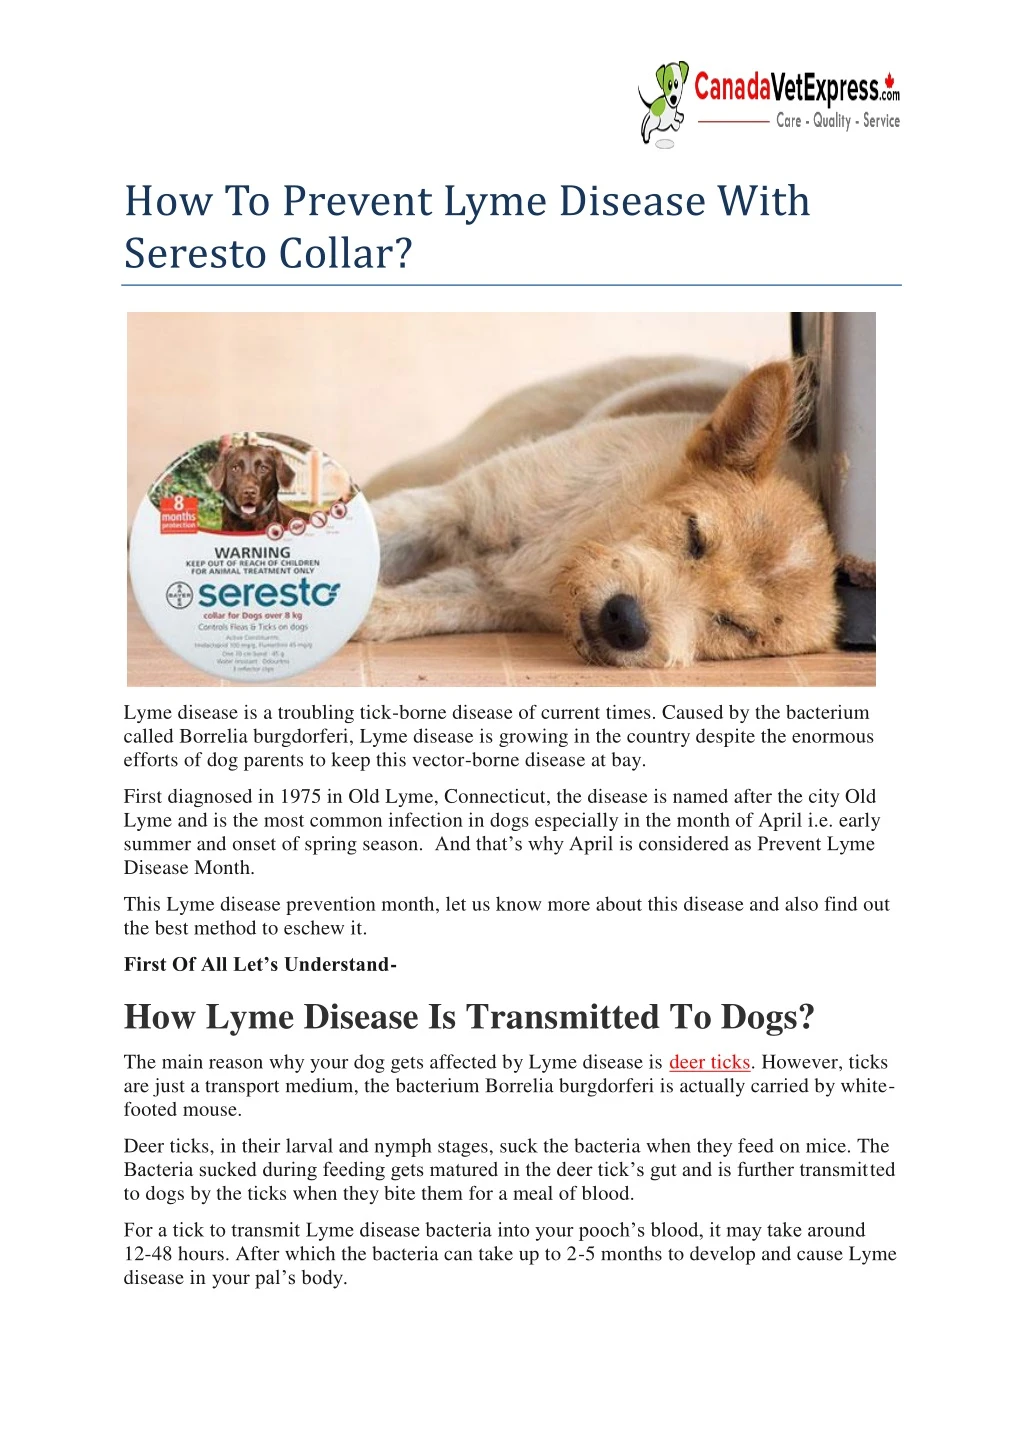 how to prevent lyme disease with seresto collar